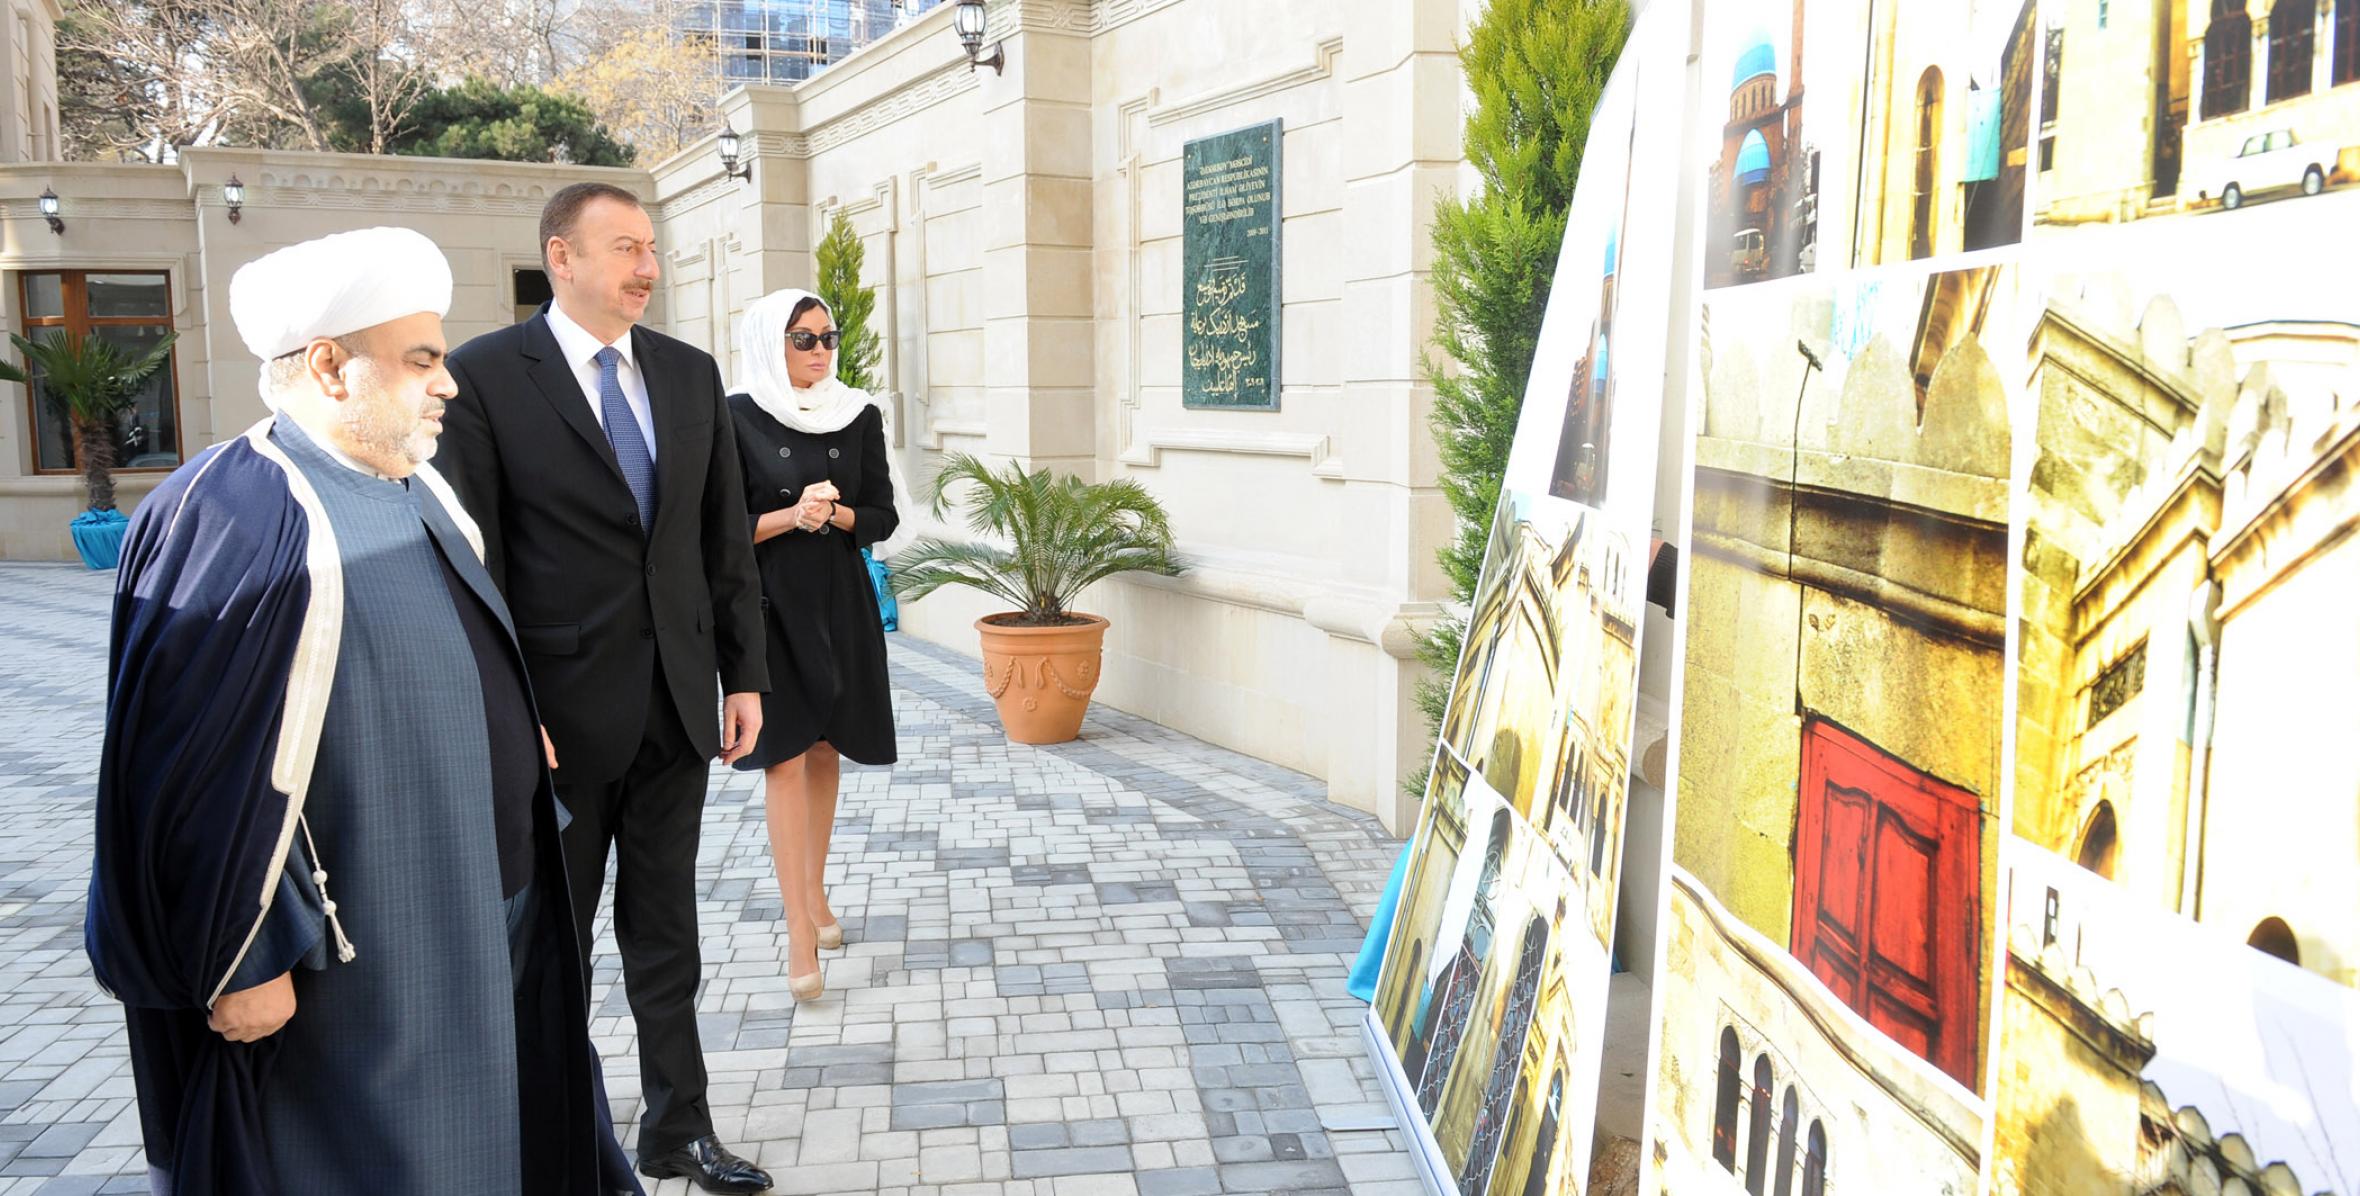 Ilham Aliyev attended the opening of the Ajdarbay Mosque in Baku after major overhaul and reconstruction